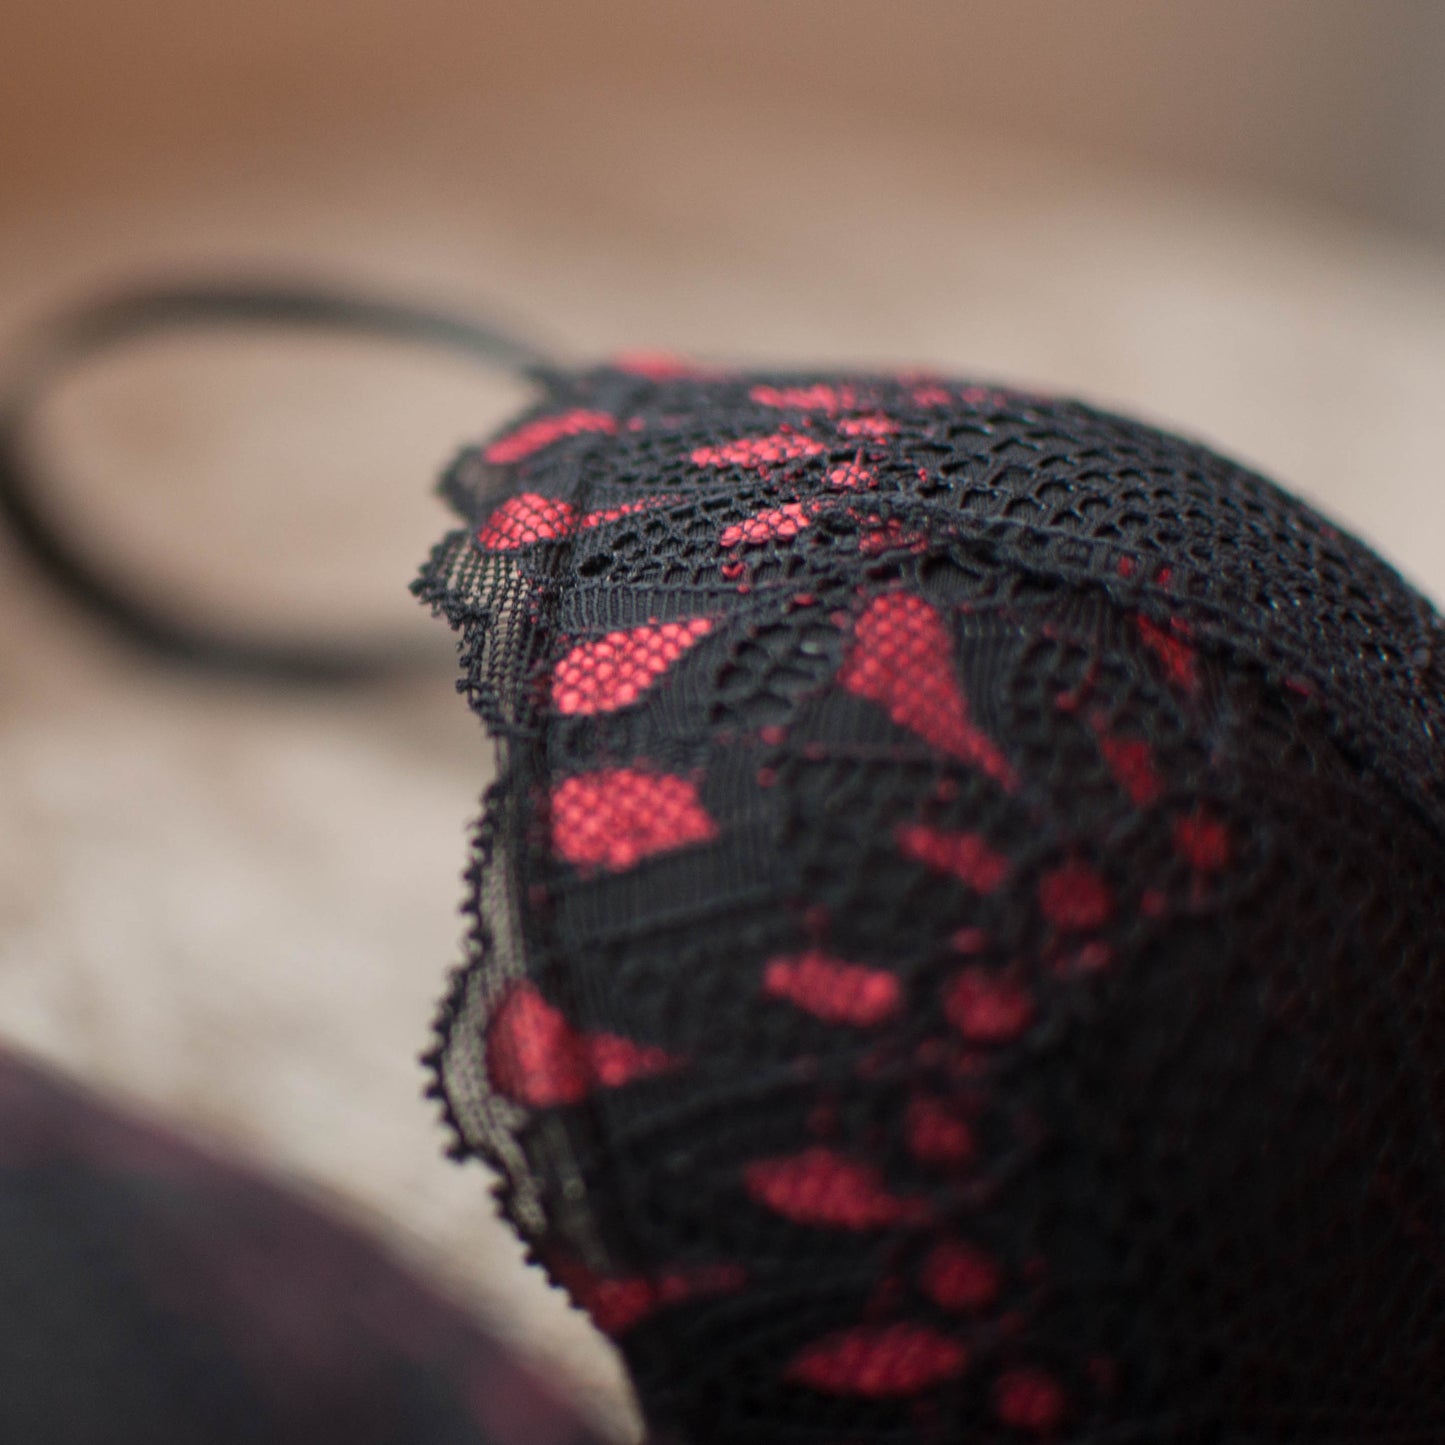 Black & red lace Lucy May Maybella Demi Plunge padded bra detail